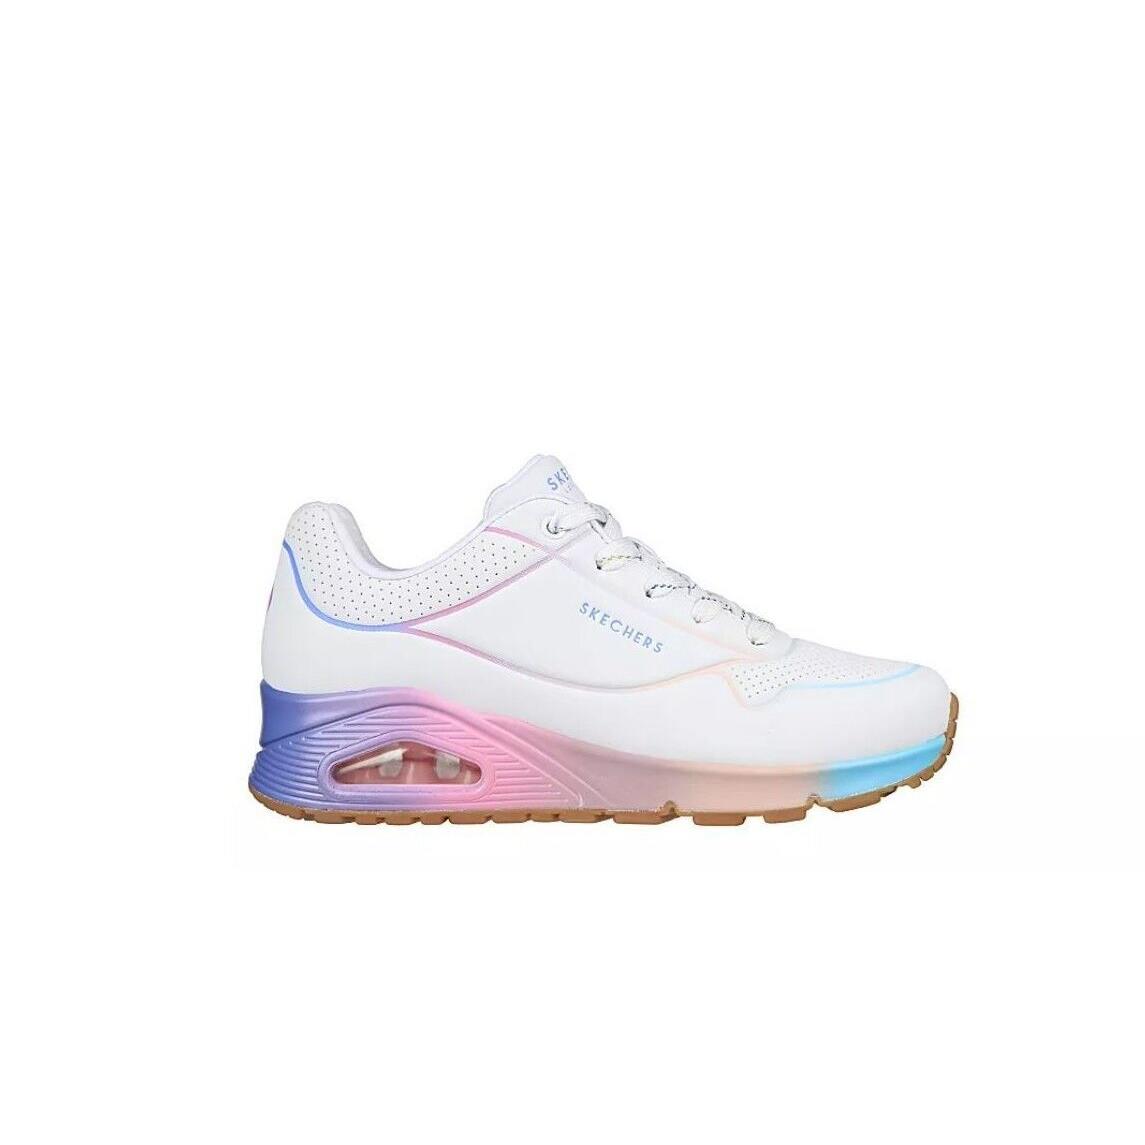 Skechers Air Uno Pop of Sunshine Low Top Women`s Casual Fashion Shoes Sneaker White-Cool Rainbow